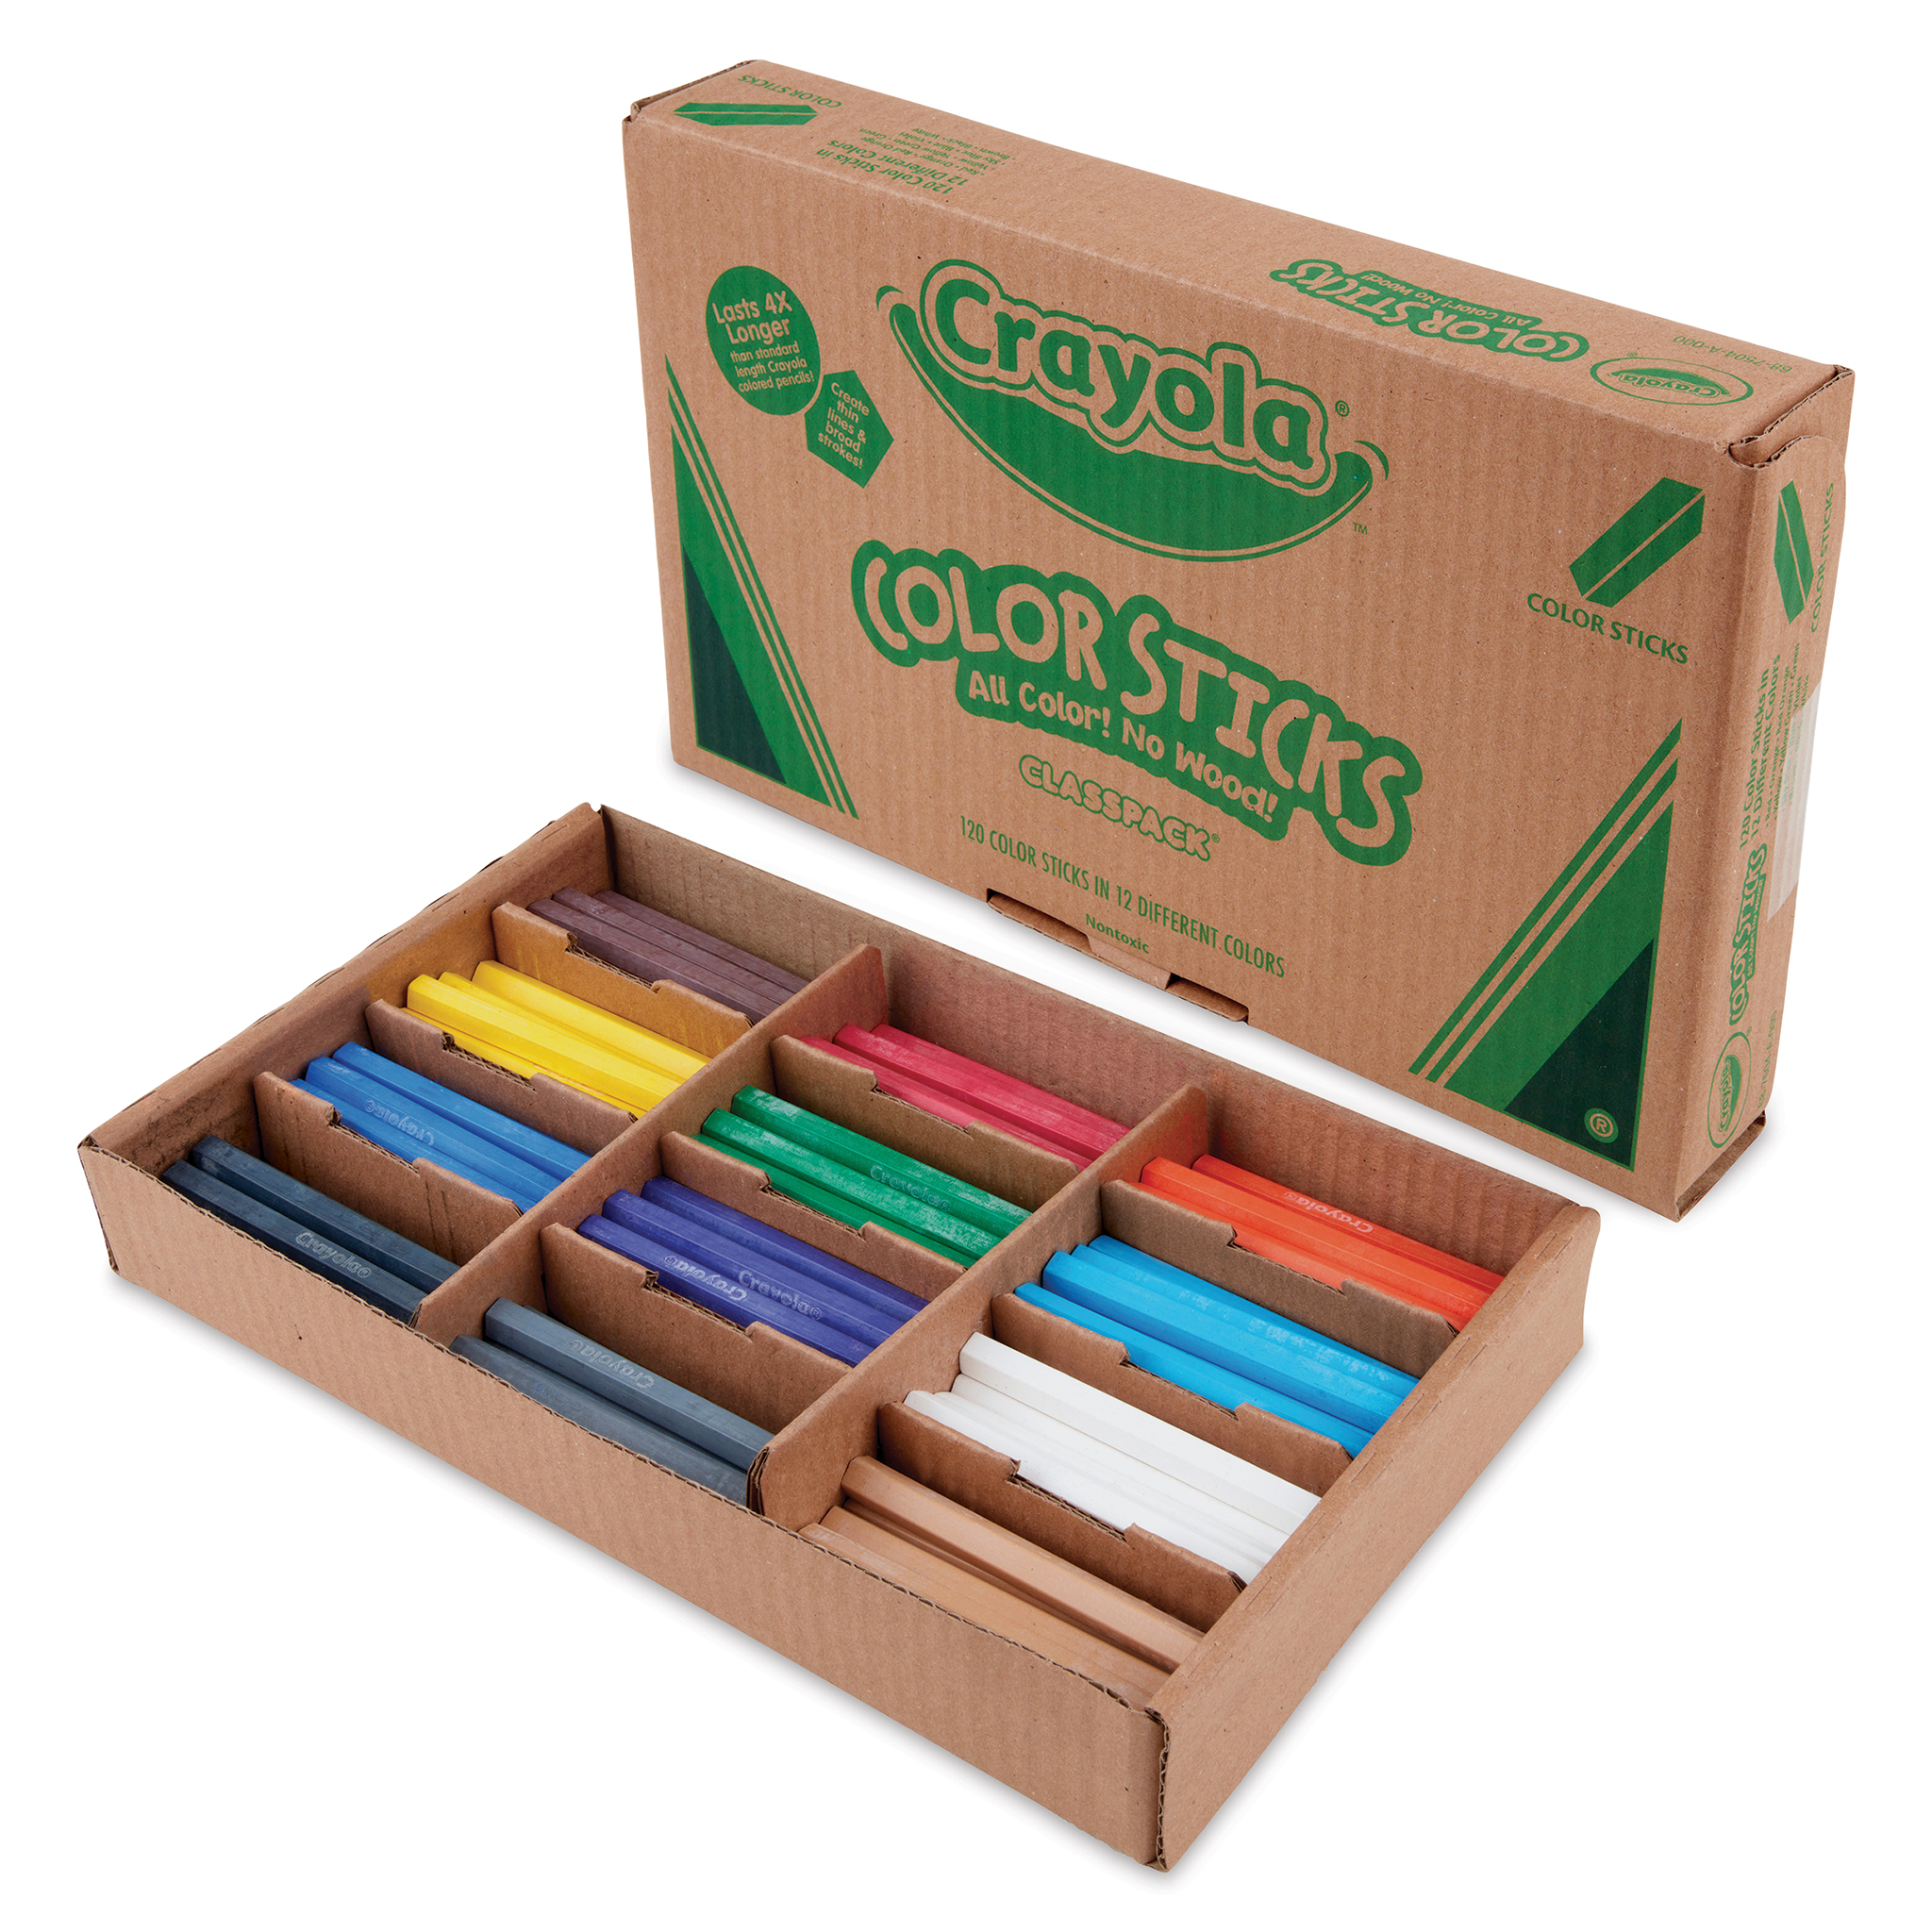 File:Crayola crayons with green wrappers.jpg - Wikimedia Commons